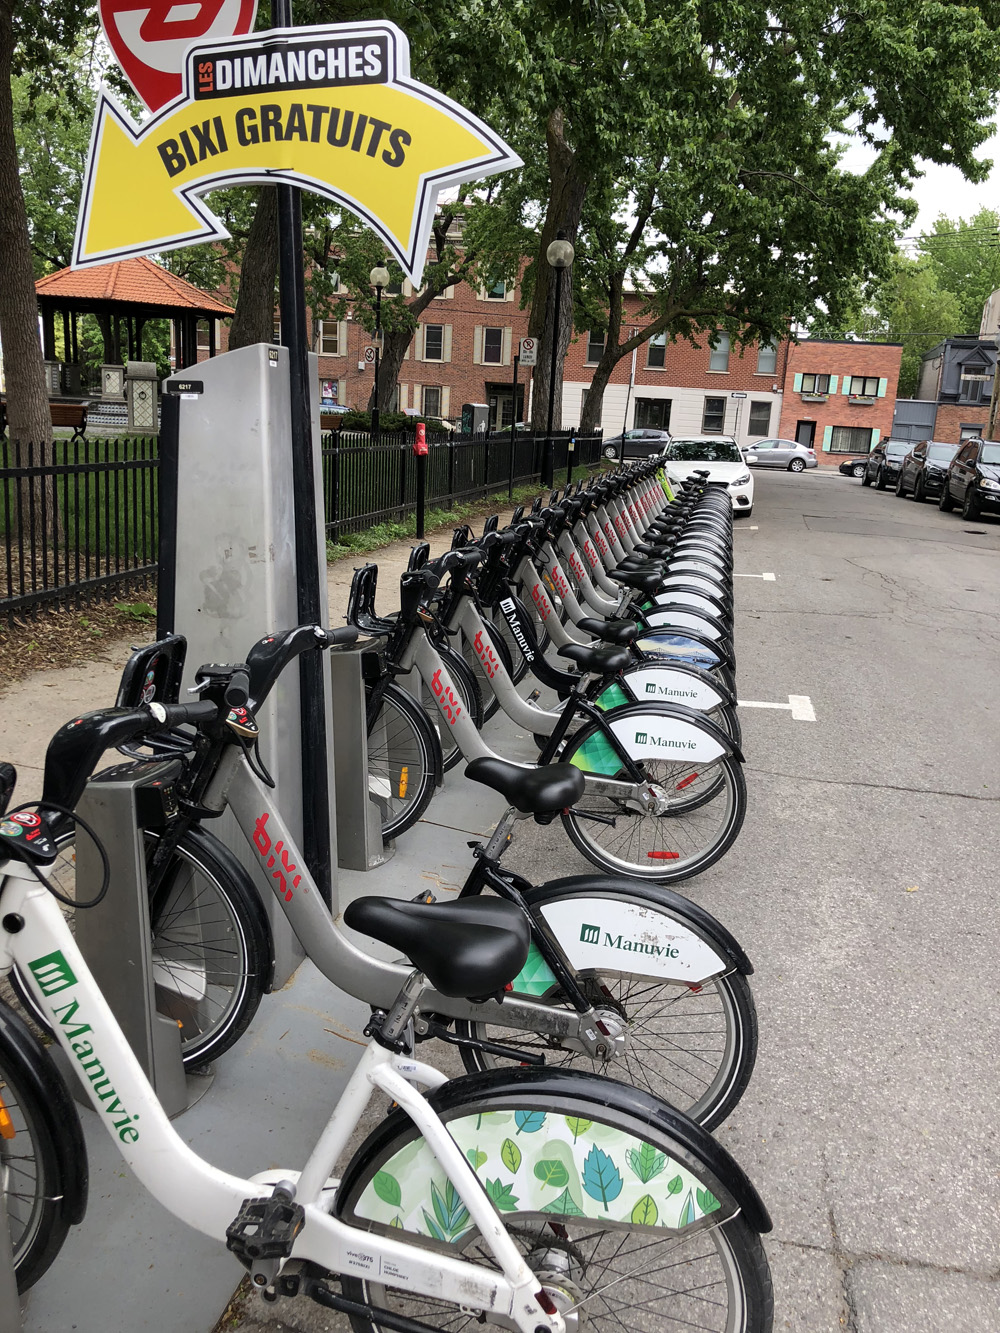 Bixi Montréal was set up in 2009 as North America’s first large-scale bike-share scheme